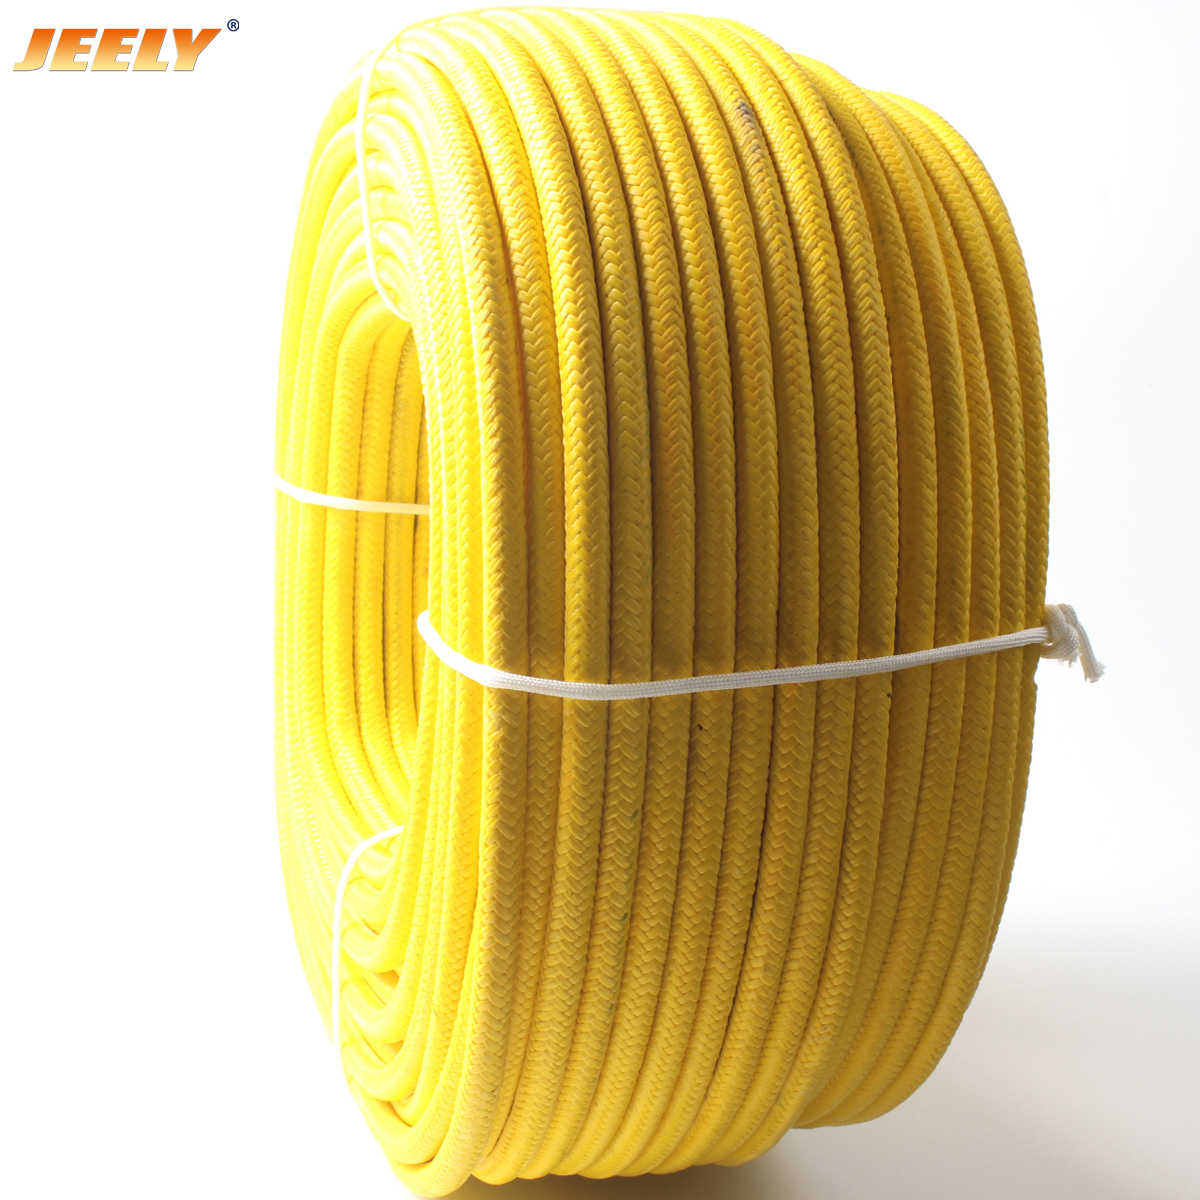 13mm 100m UHMWPE Core with UHMWPE Jacket Double Braid Winch Tow Rope